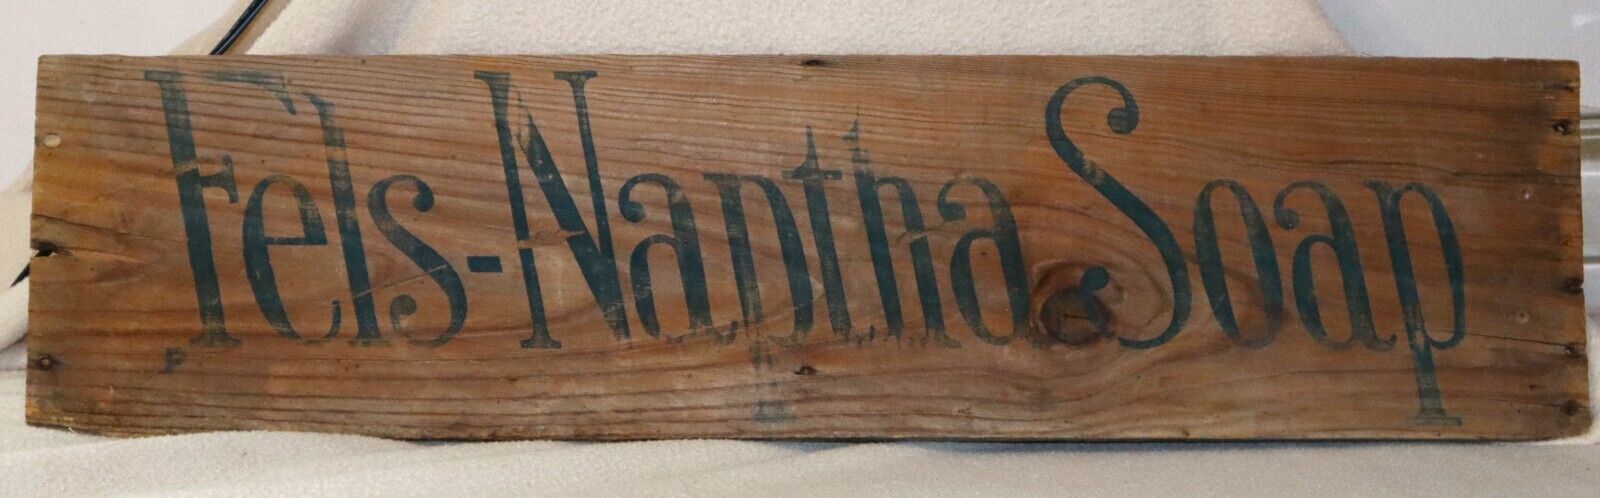 Vintage Advertising Fels-Naptha Soap Wood Crate Wooden Box Side